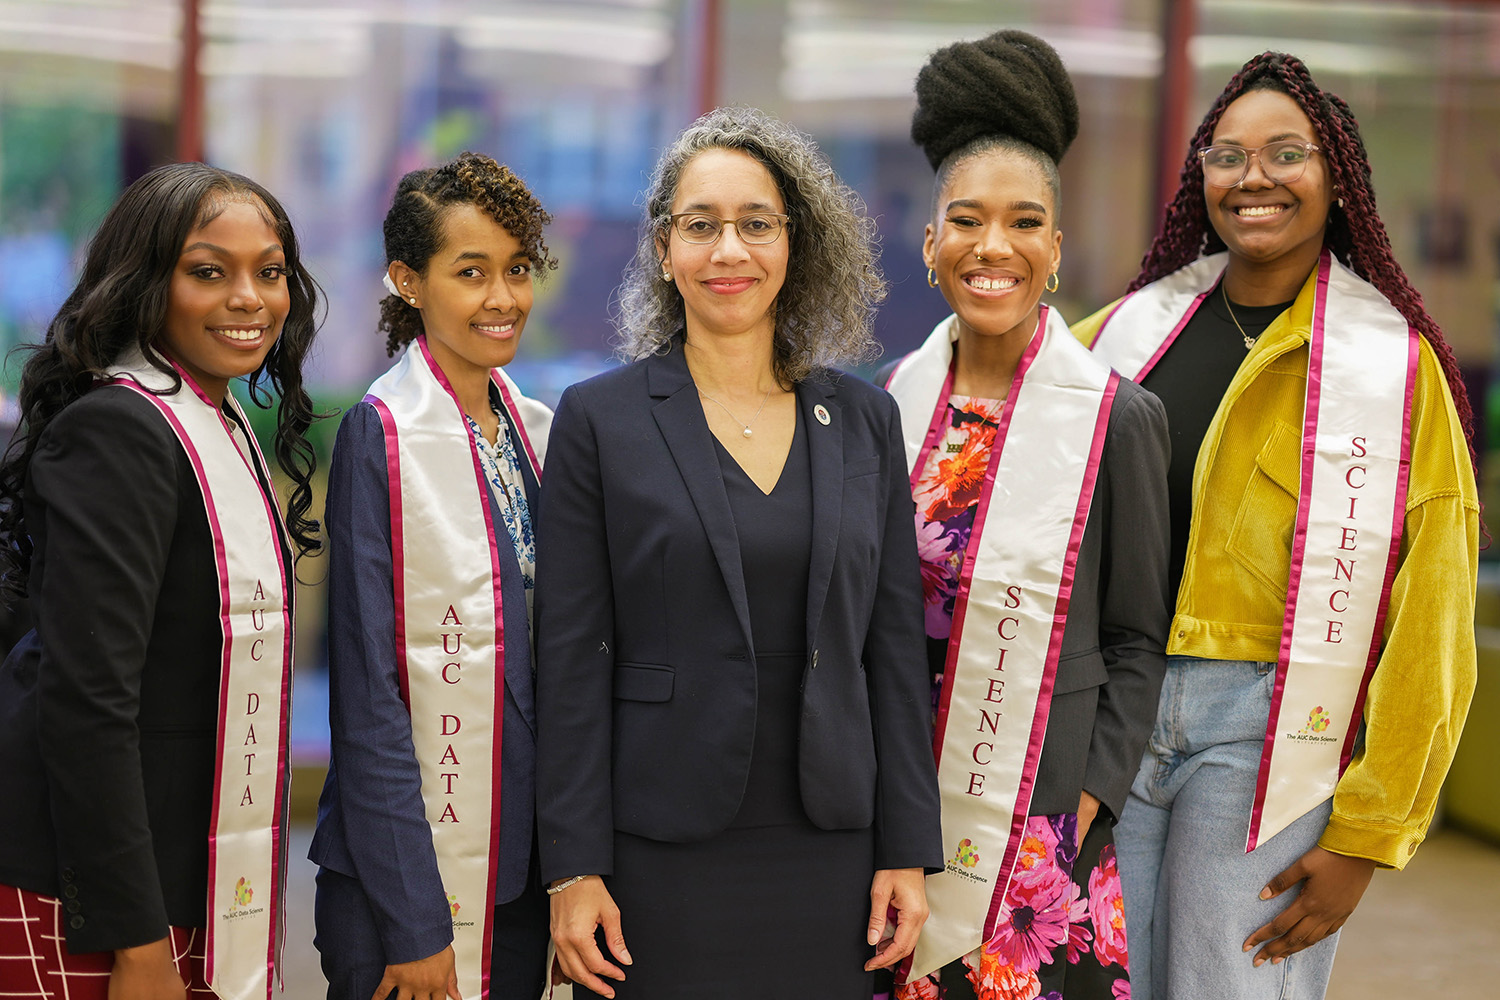 Washington honors some of 2022’s rising and graduating data science students.